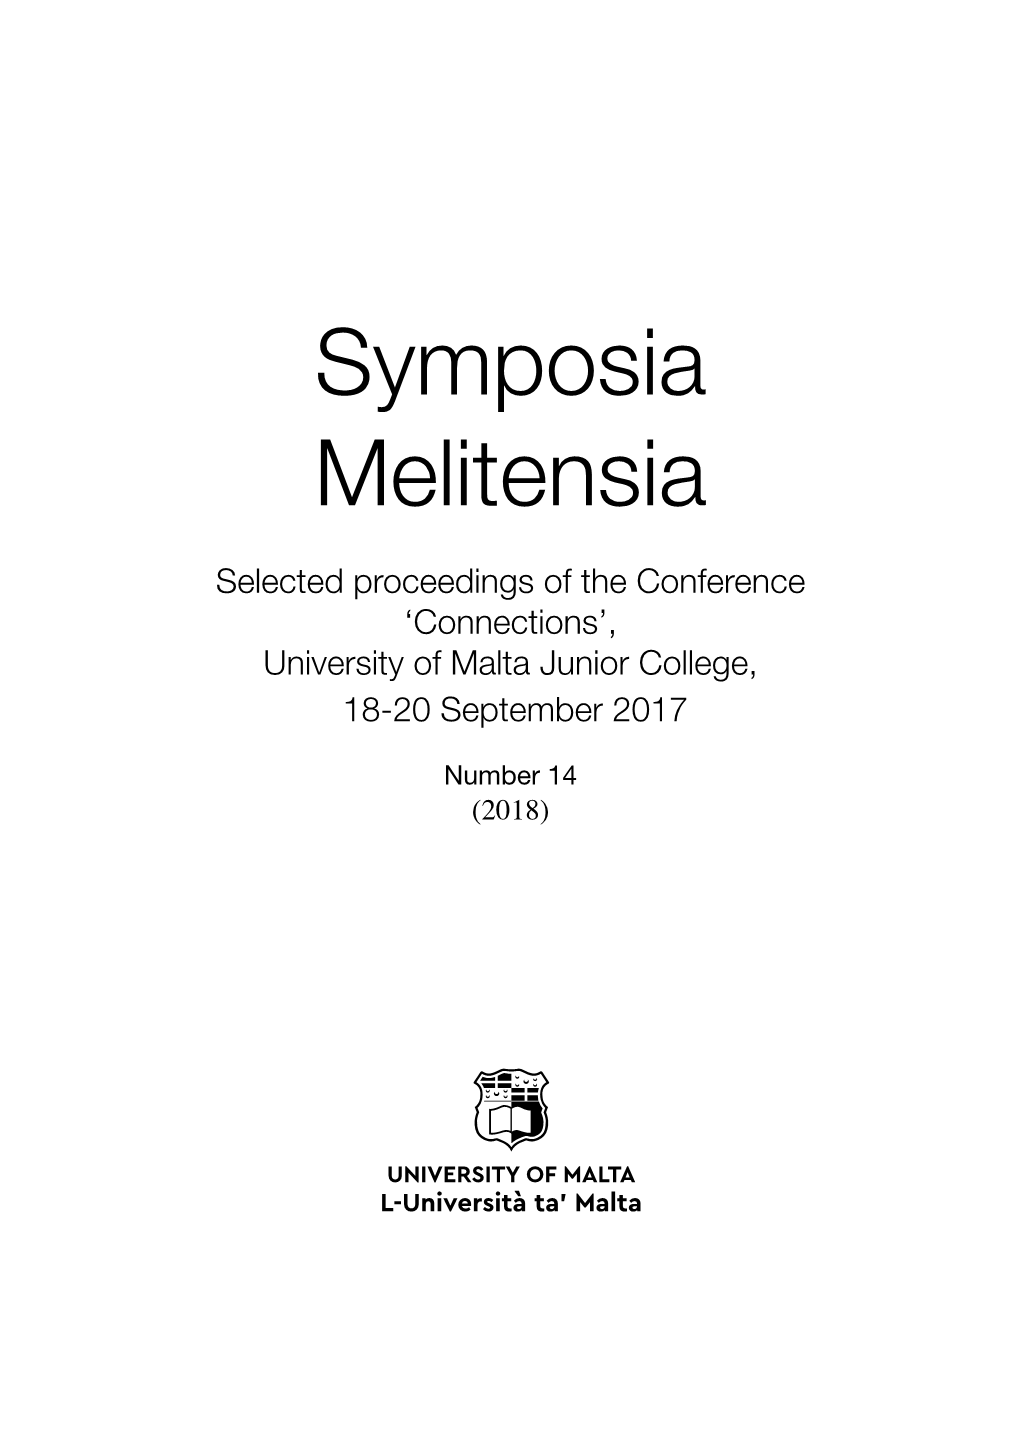 Symposia Melitensia Selected Proceedings of the Conference ‘Connections’, University of Malta Junior College, 18-20 September 2017